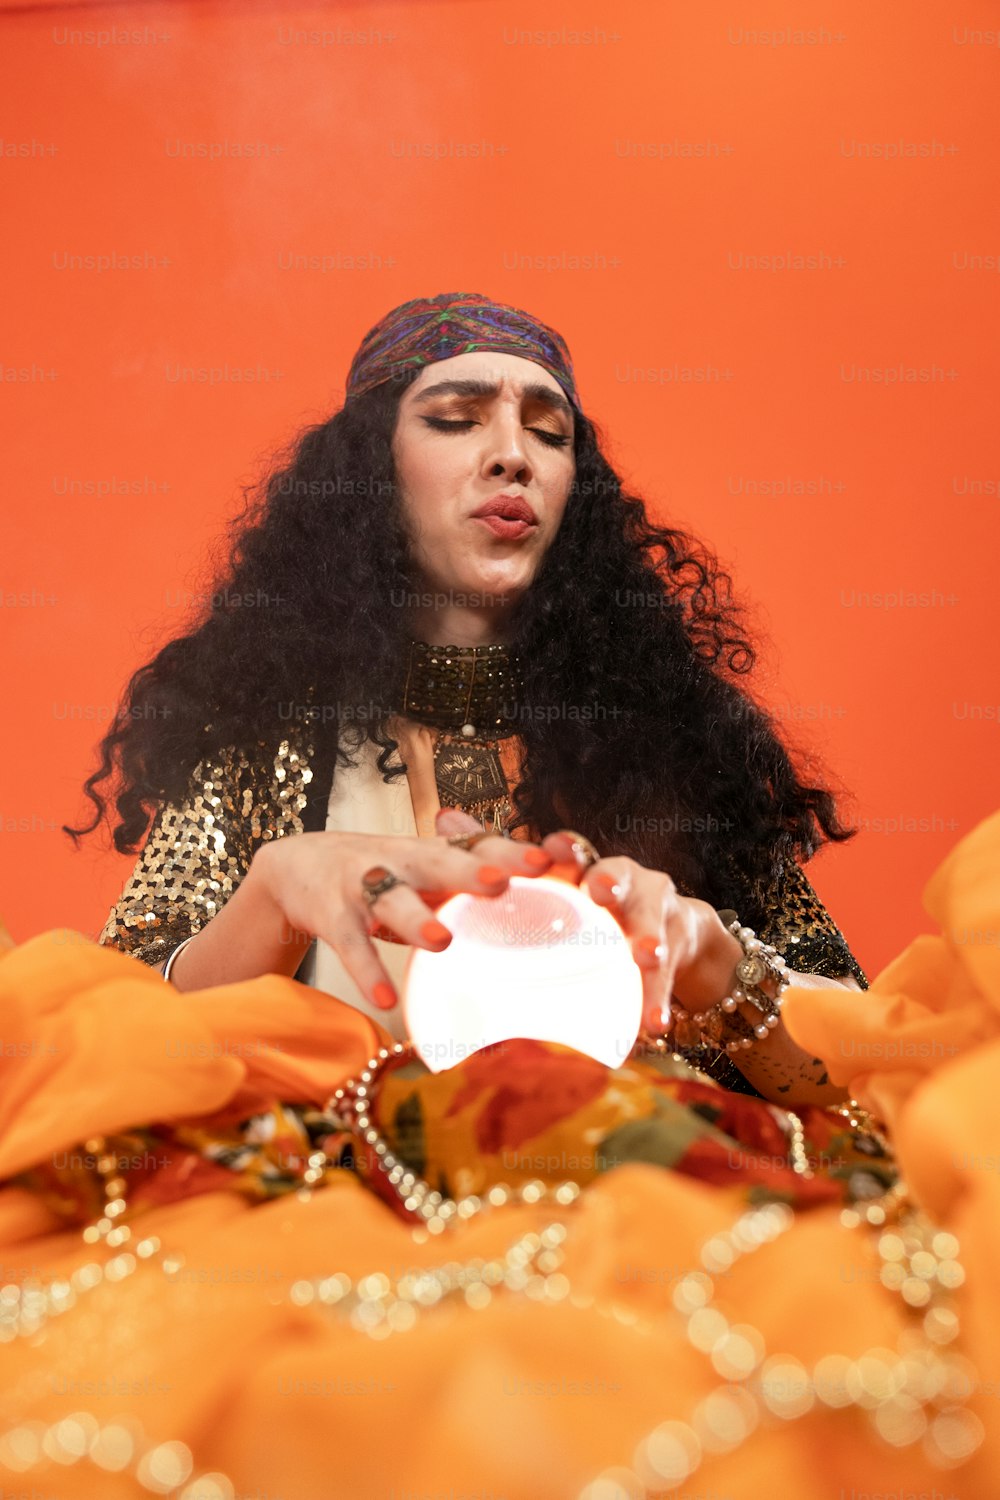 a person wearing a headdress holding a white bowl of gold